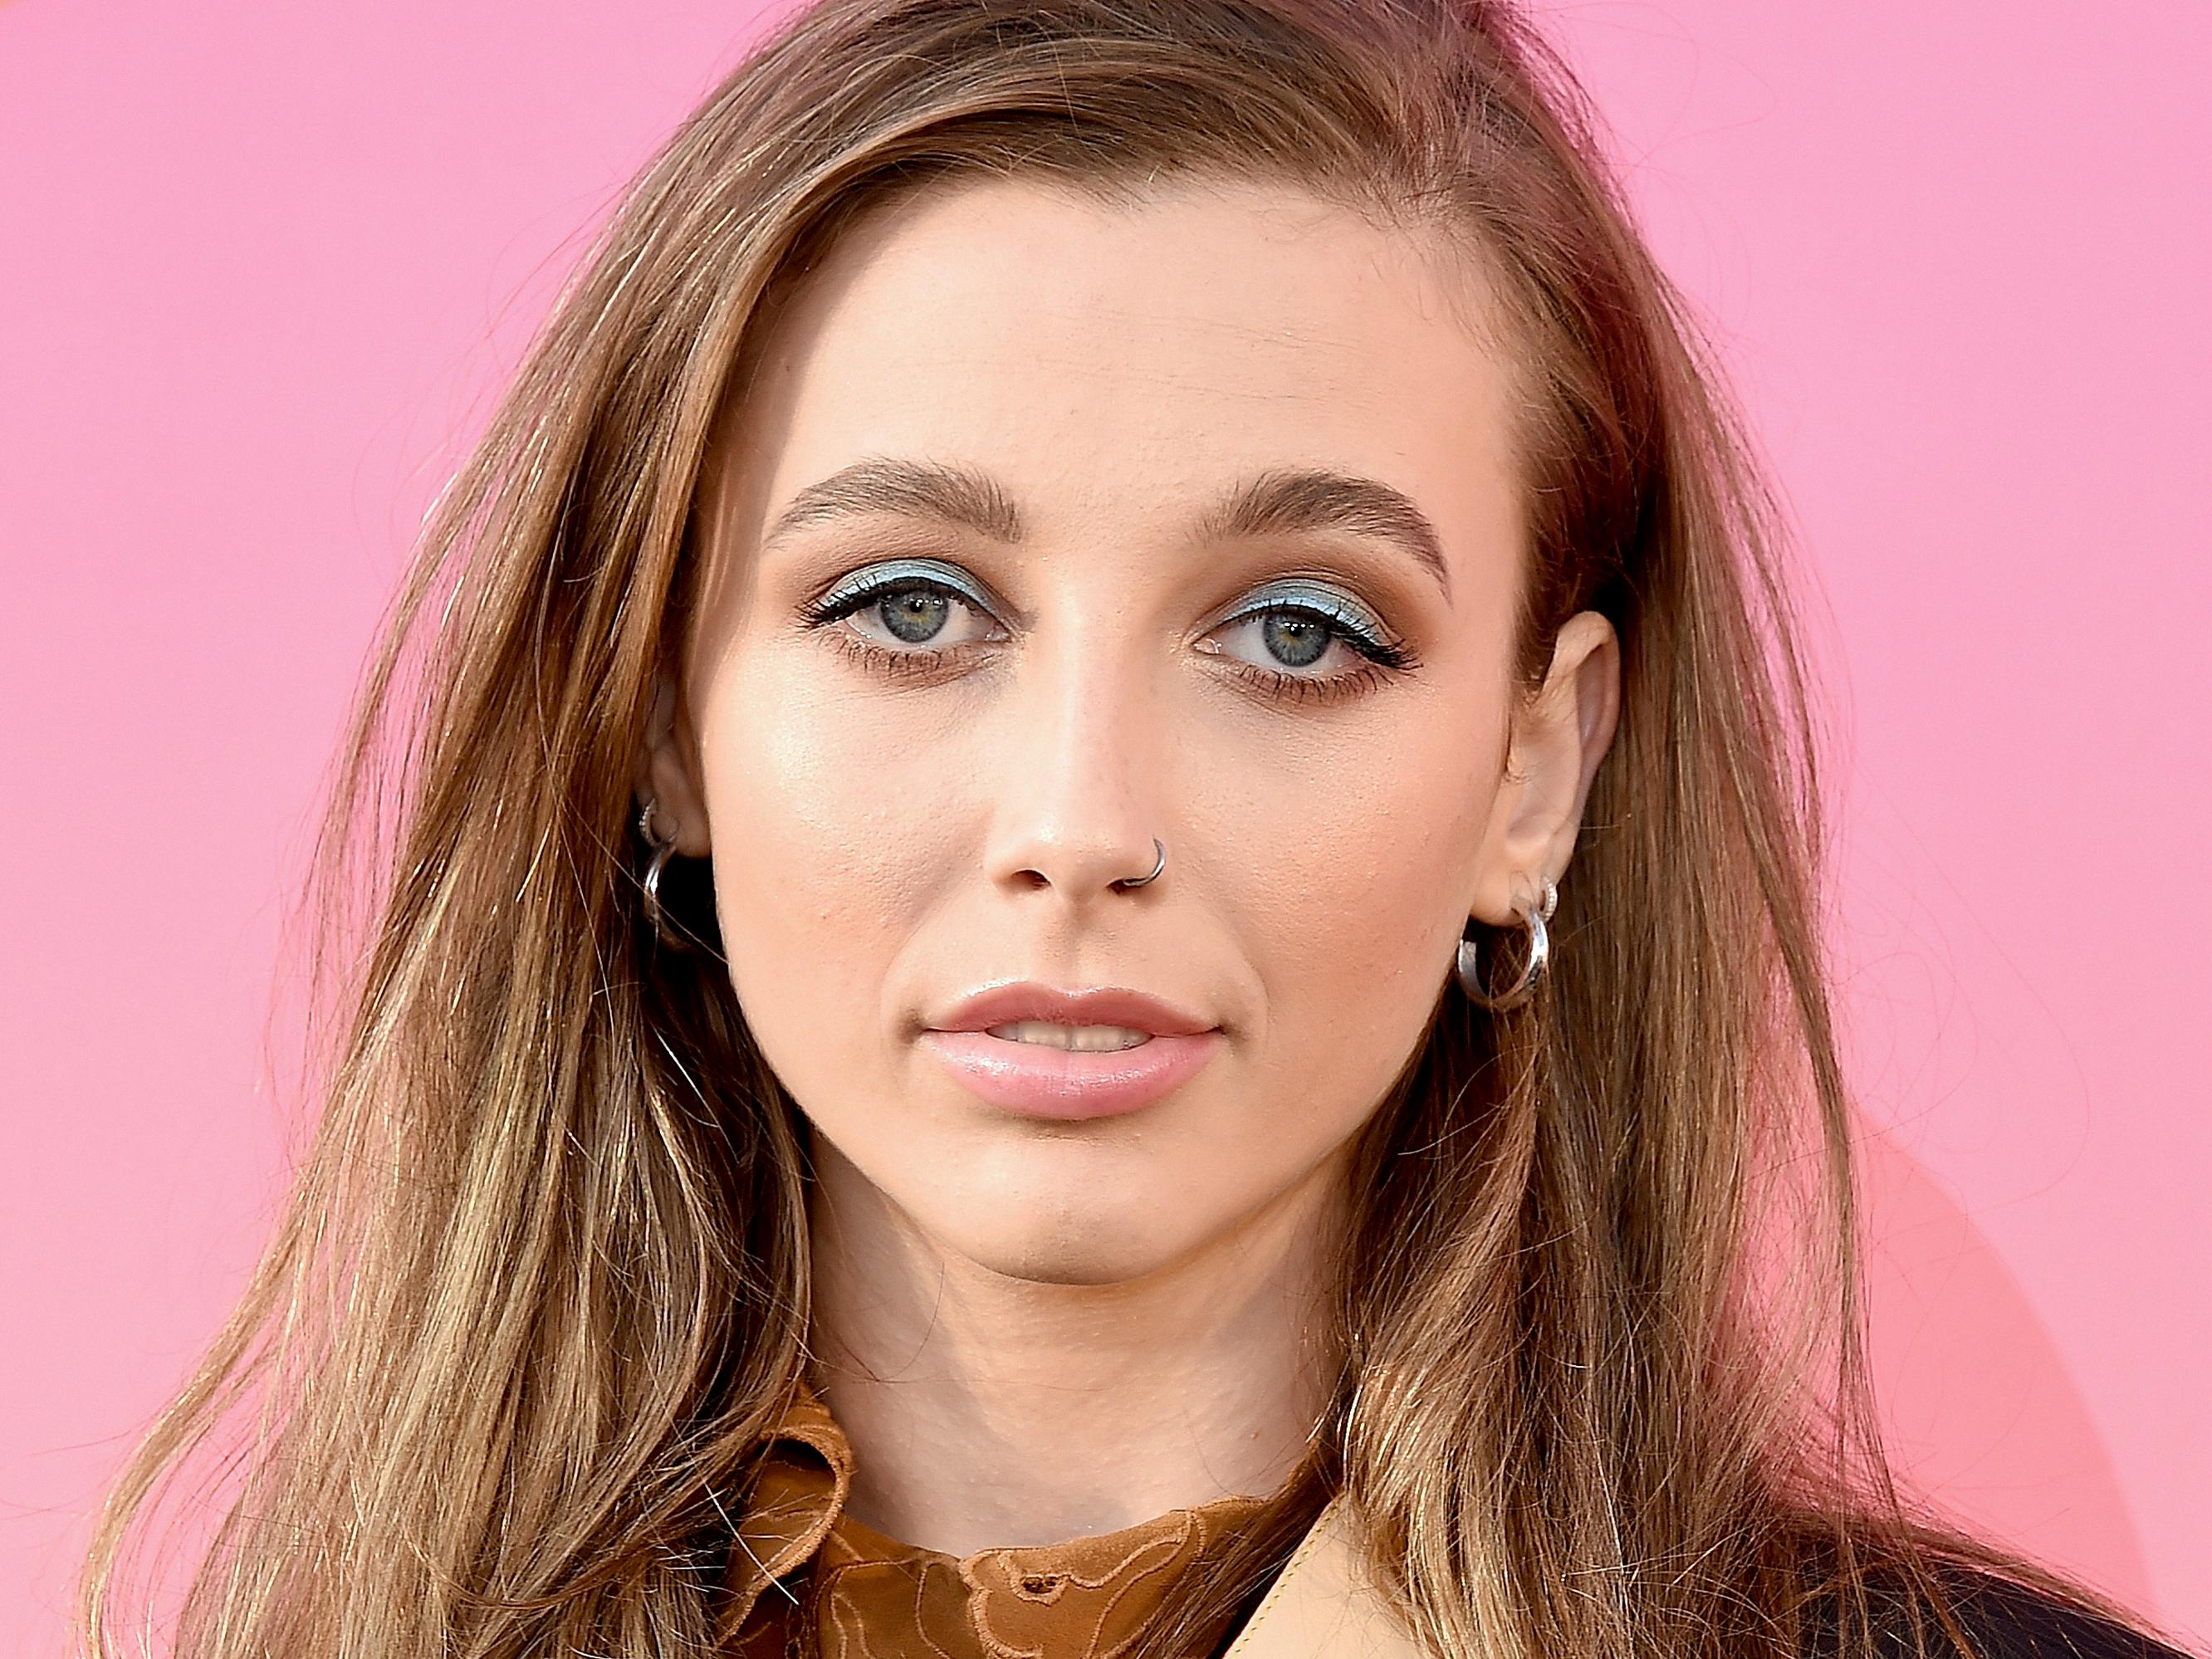 All About Emma Chamberlain's Parents, Michael and Sophia Chamberlain